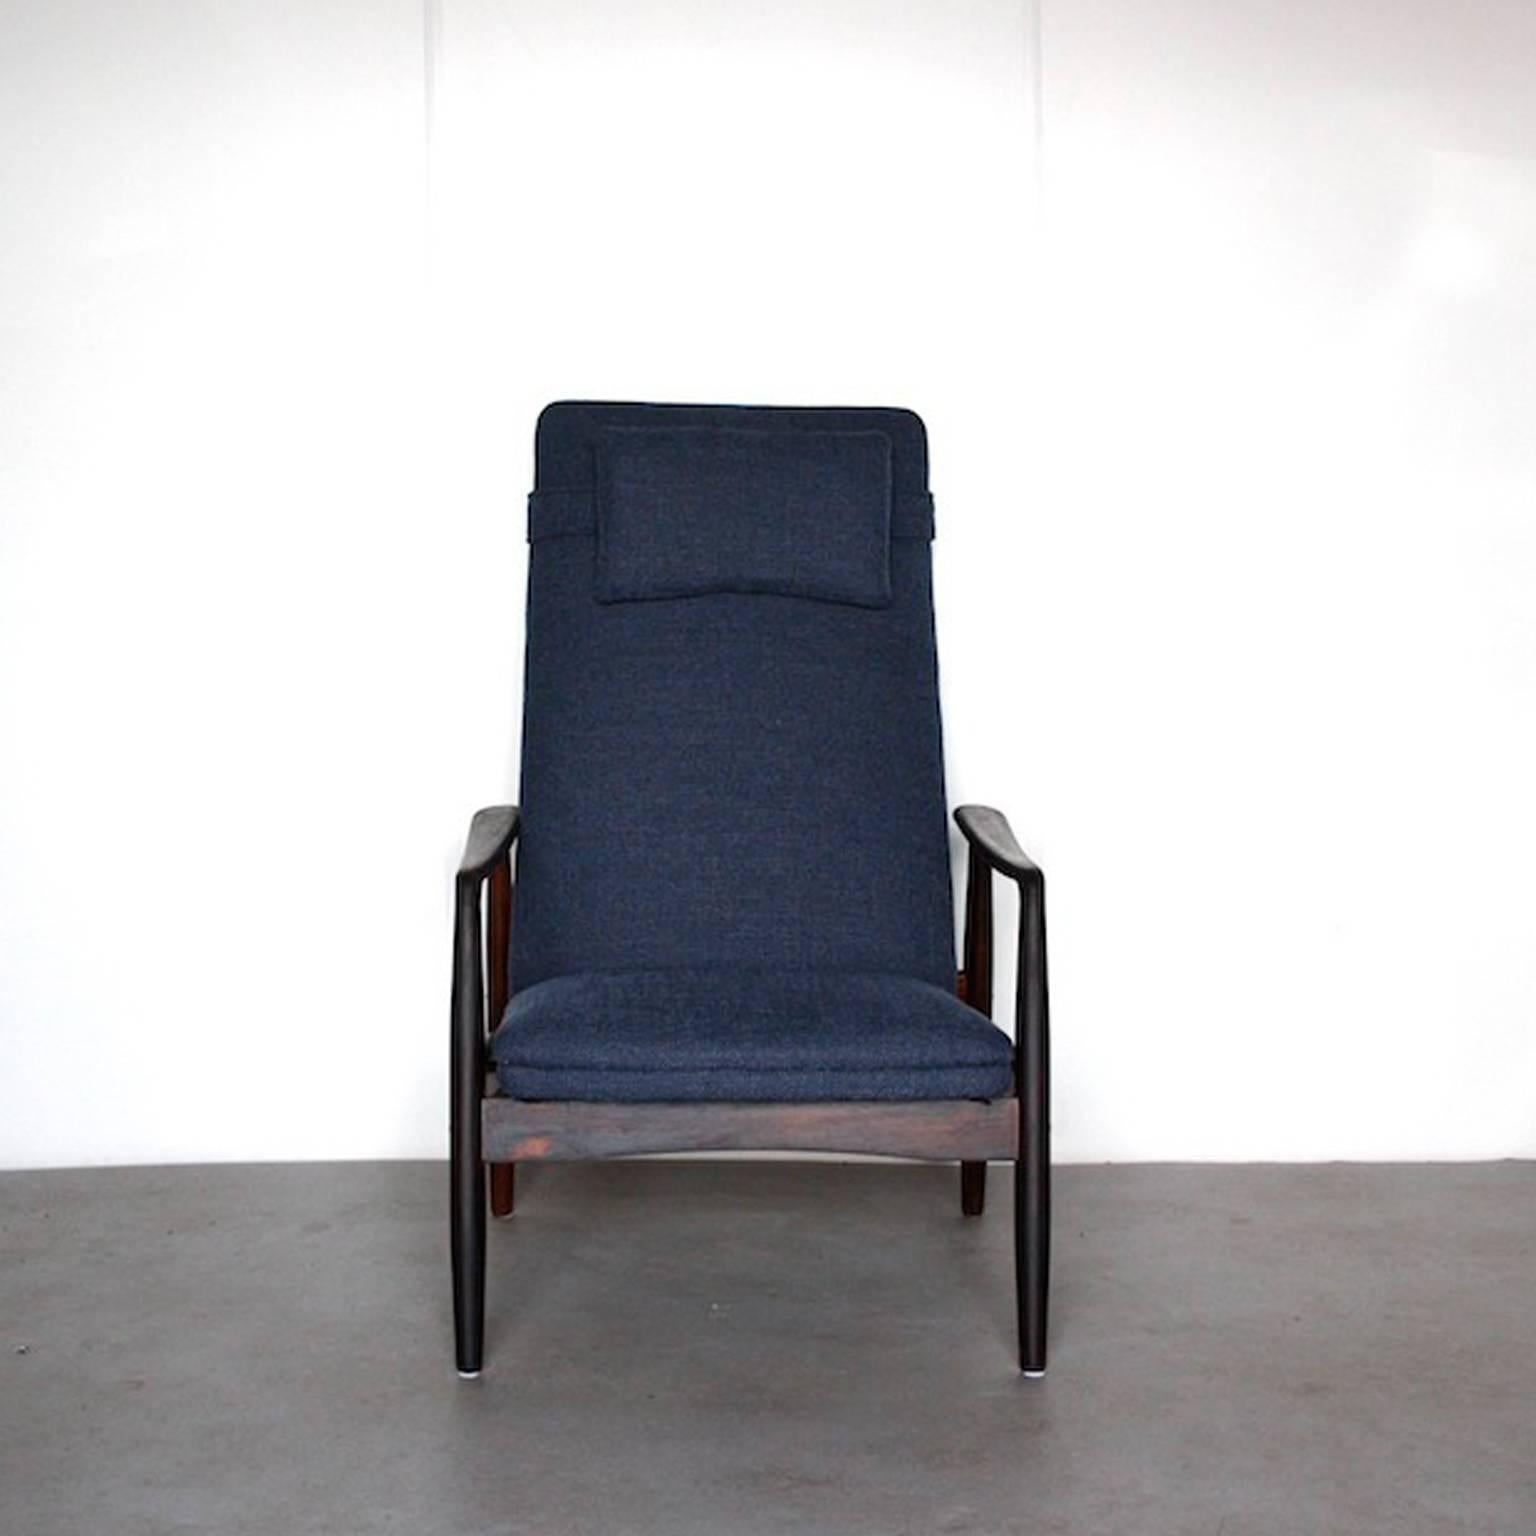 High back lounge chair by Søren Ladefoged for SL Mobler, Danish design, 1950s.

Beautiful Danish high quality recliner lounge chair from the Mid-Century. The chair has a nice organic rosewood frame with new denim-blue upholstery. The seating of